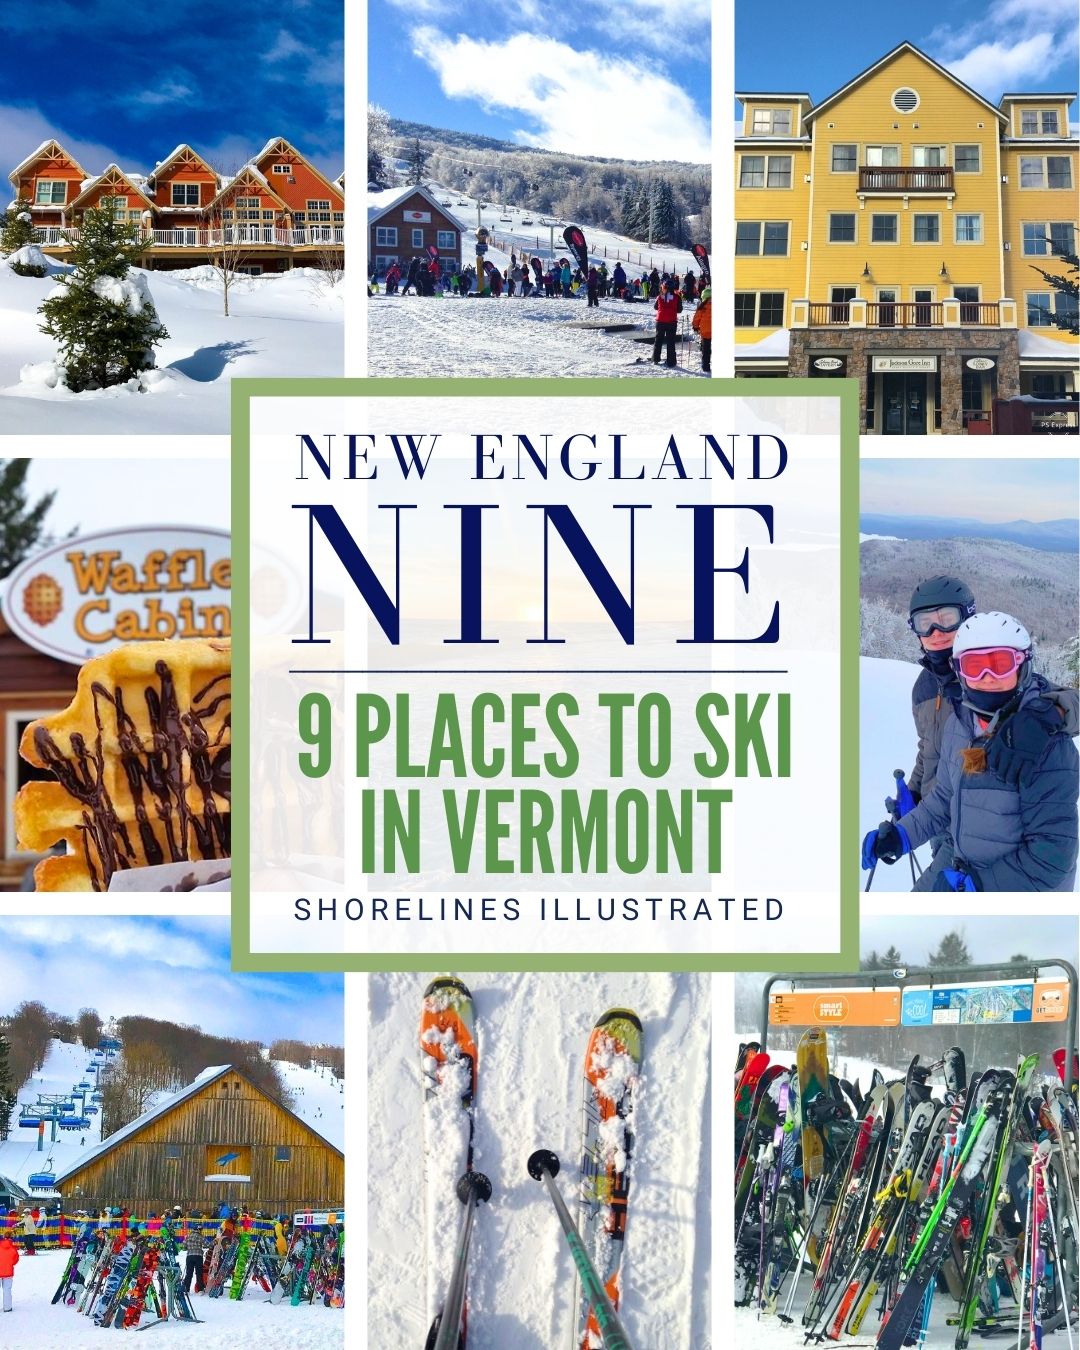 9 Places to Ski and Snowboard in Vermont - Shorelines Illustrated